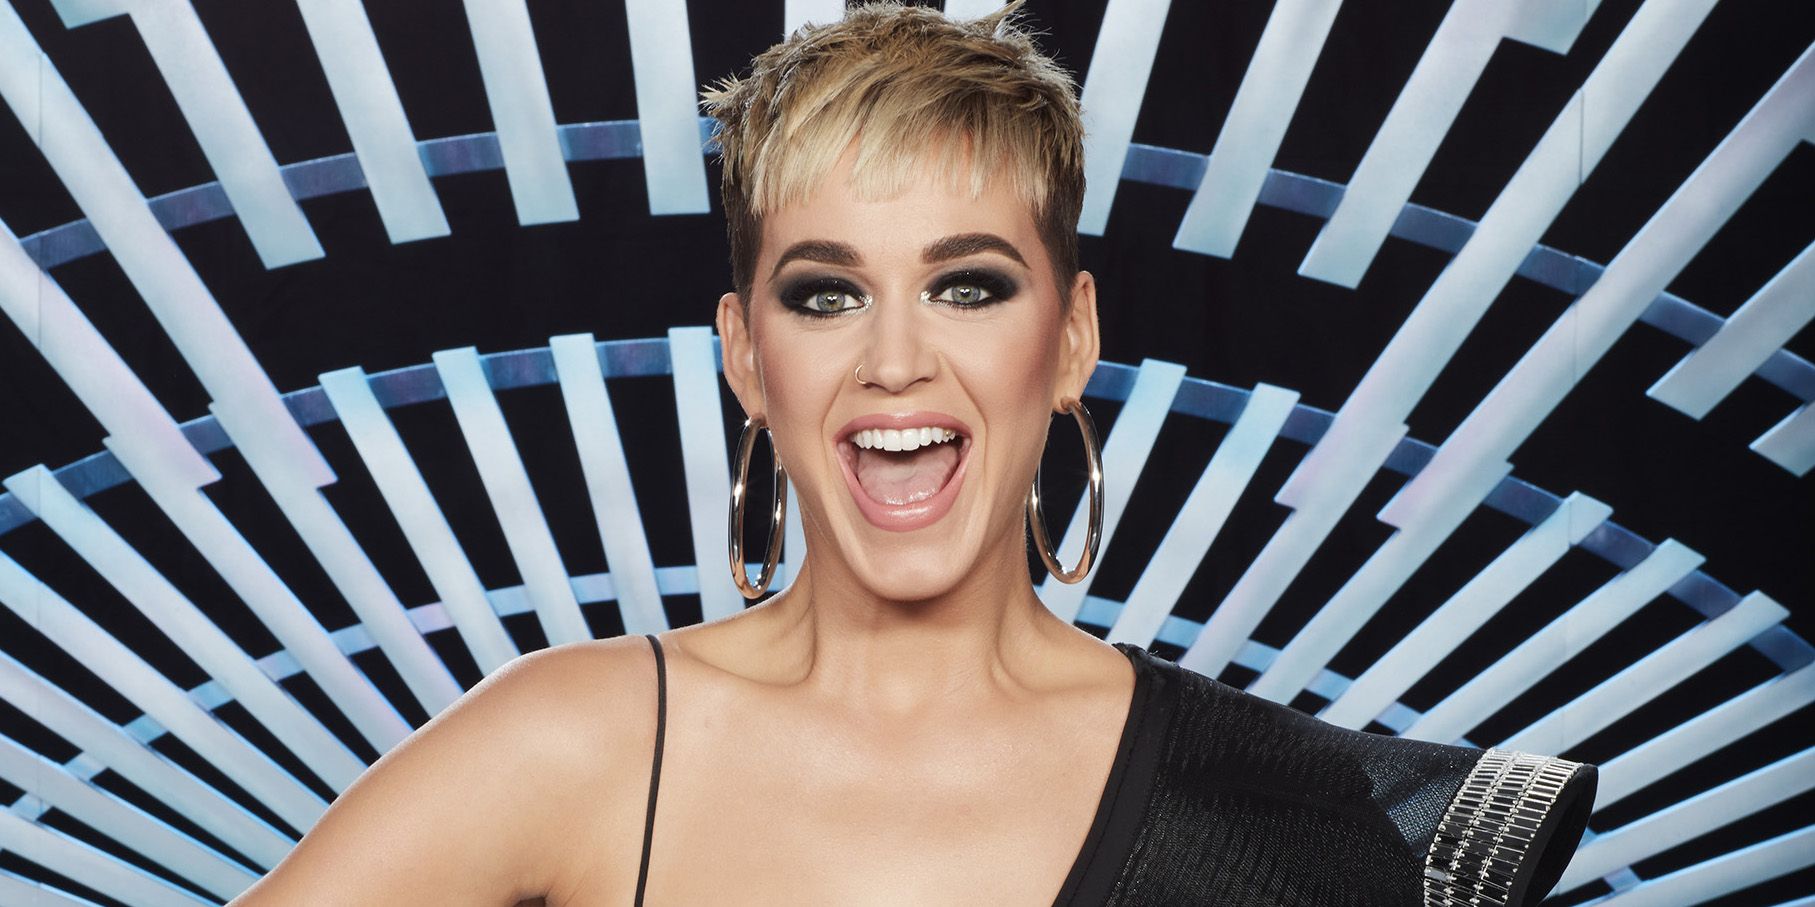 Katy Perry Roasted By Her Parents on 'American Idol' - Katy Perry's Mom and  Dad Insult Singer on Air